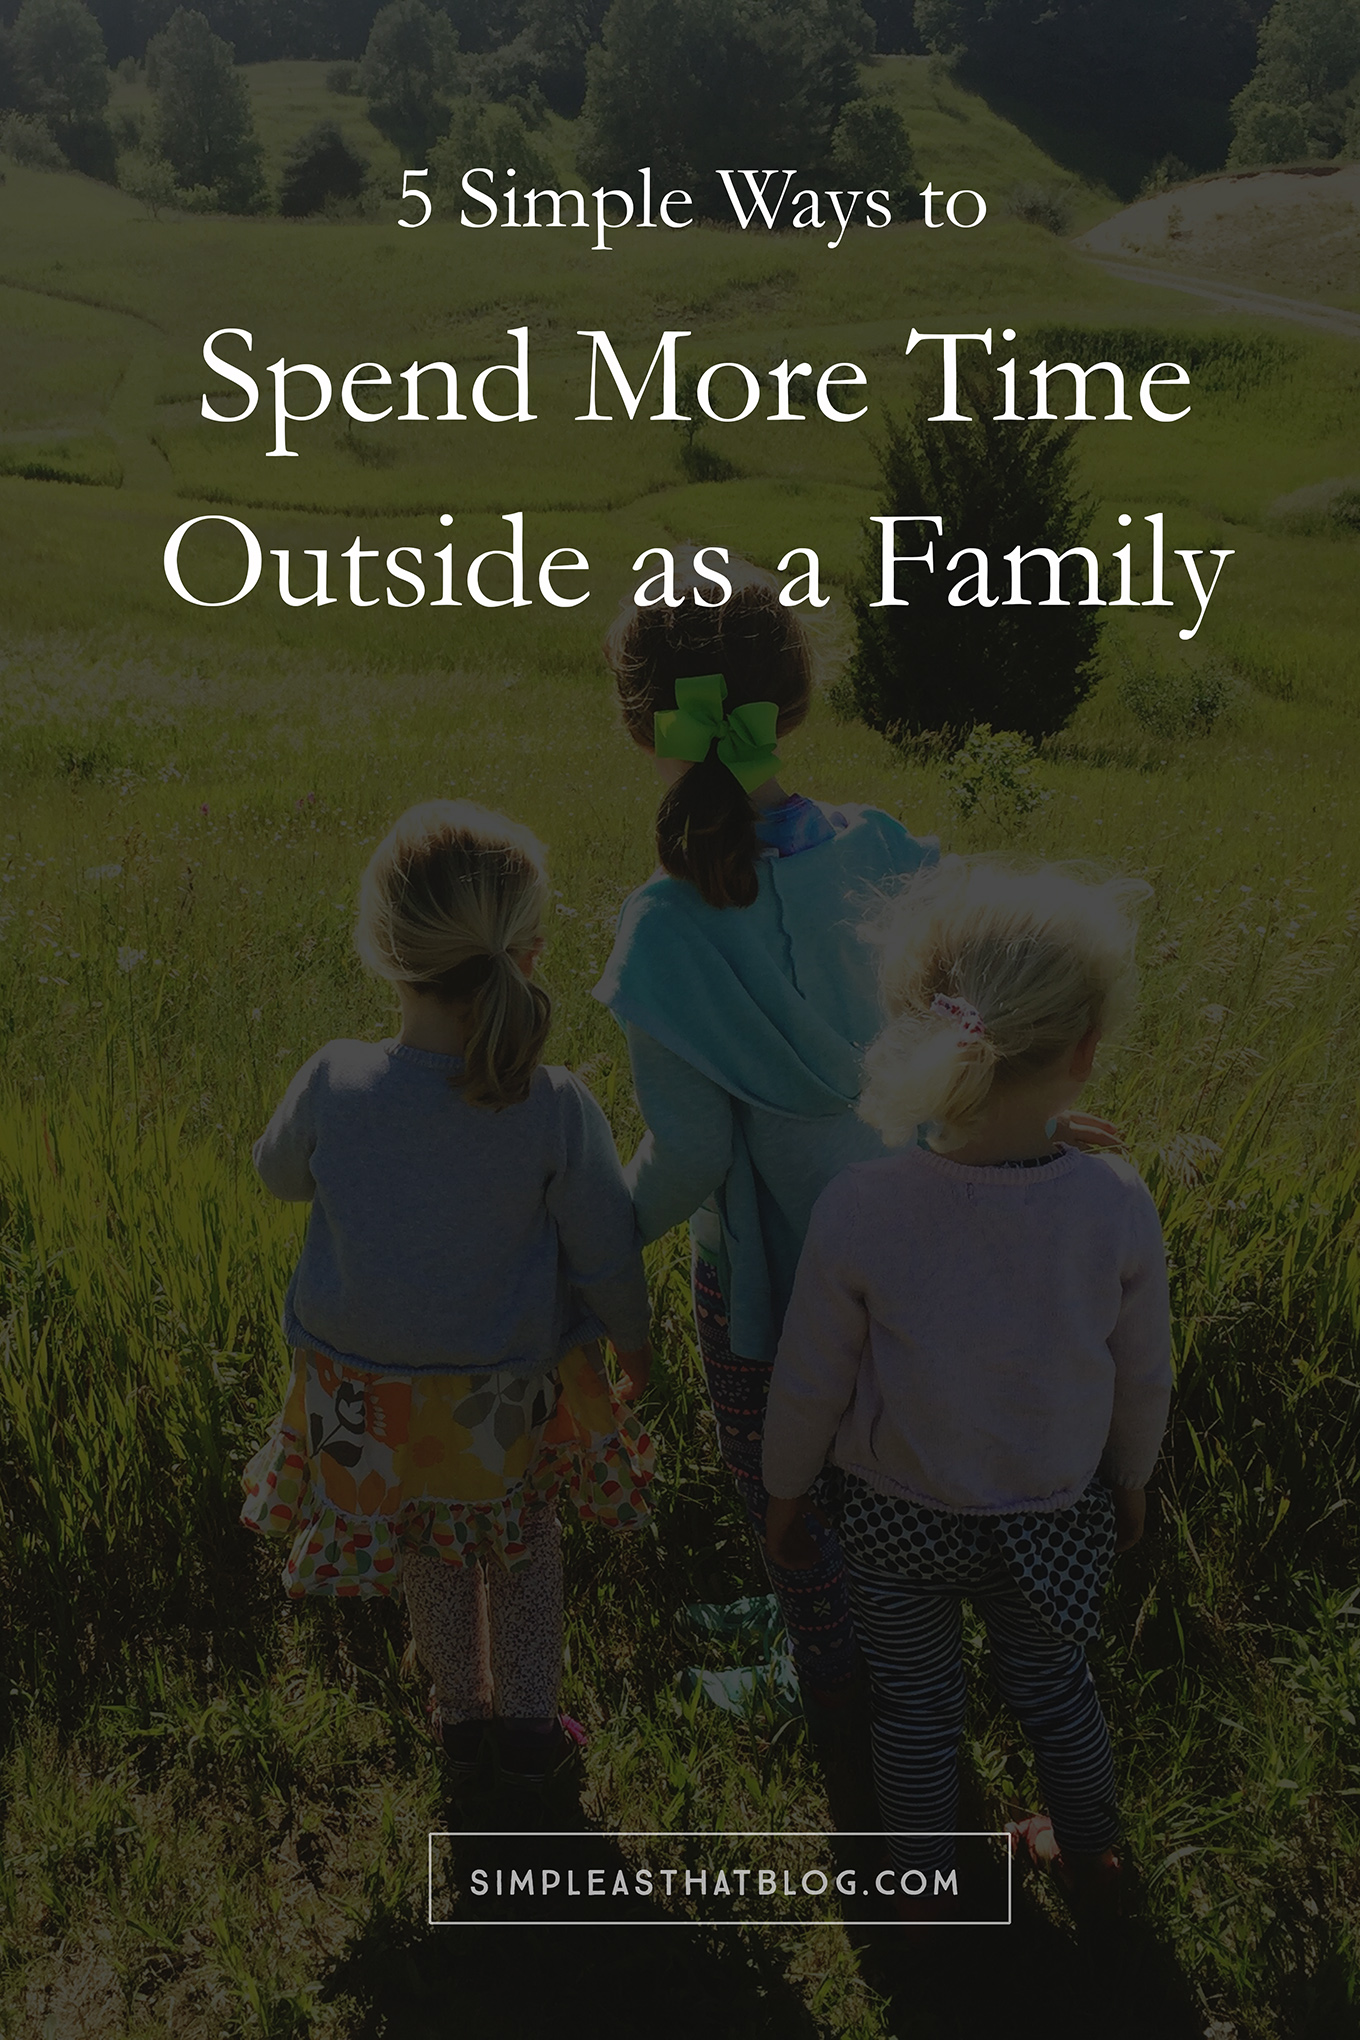 When kids spend time outside they build confidence, become more creative, and grow closer to their families. Here are 5 tips to get your kids out in nature.